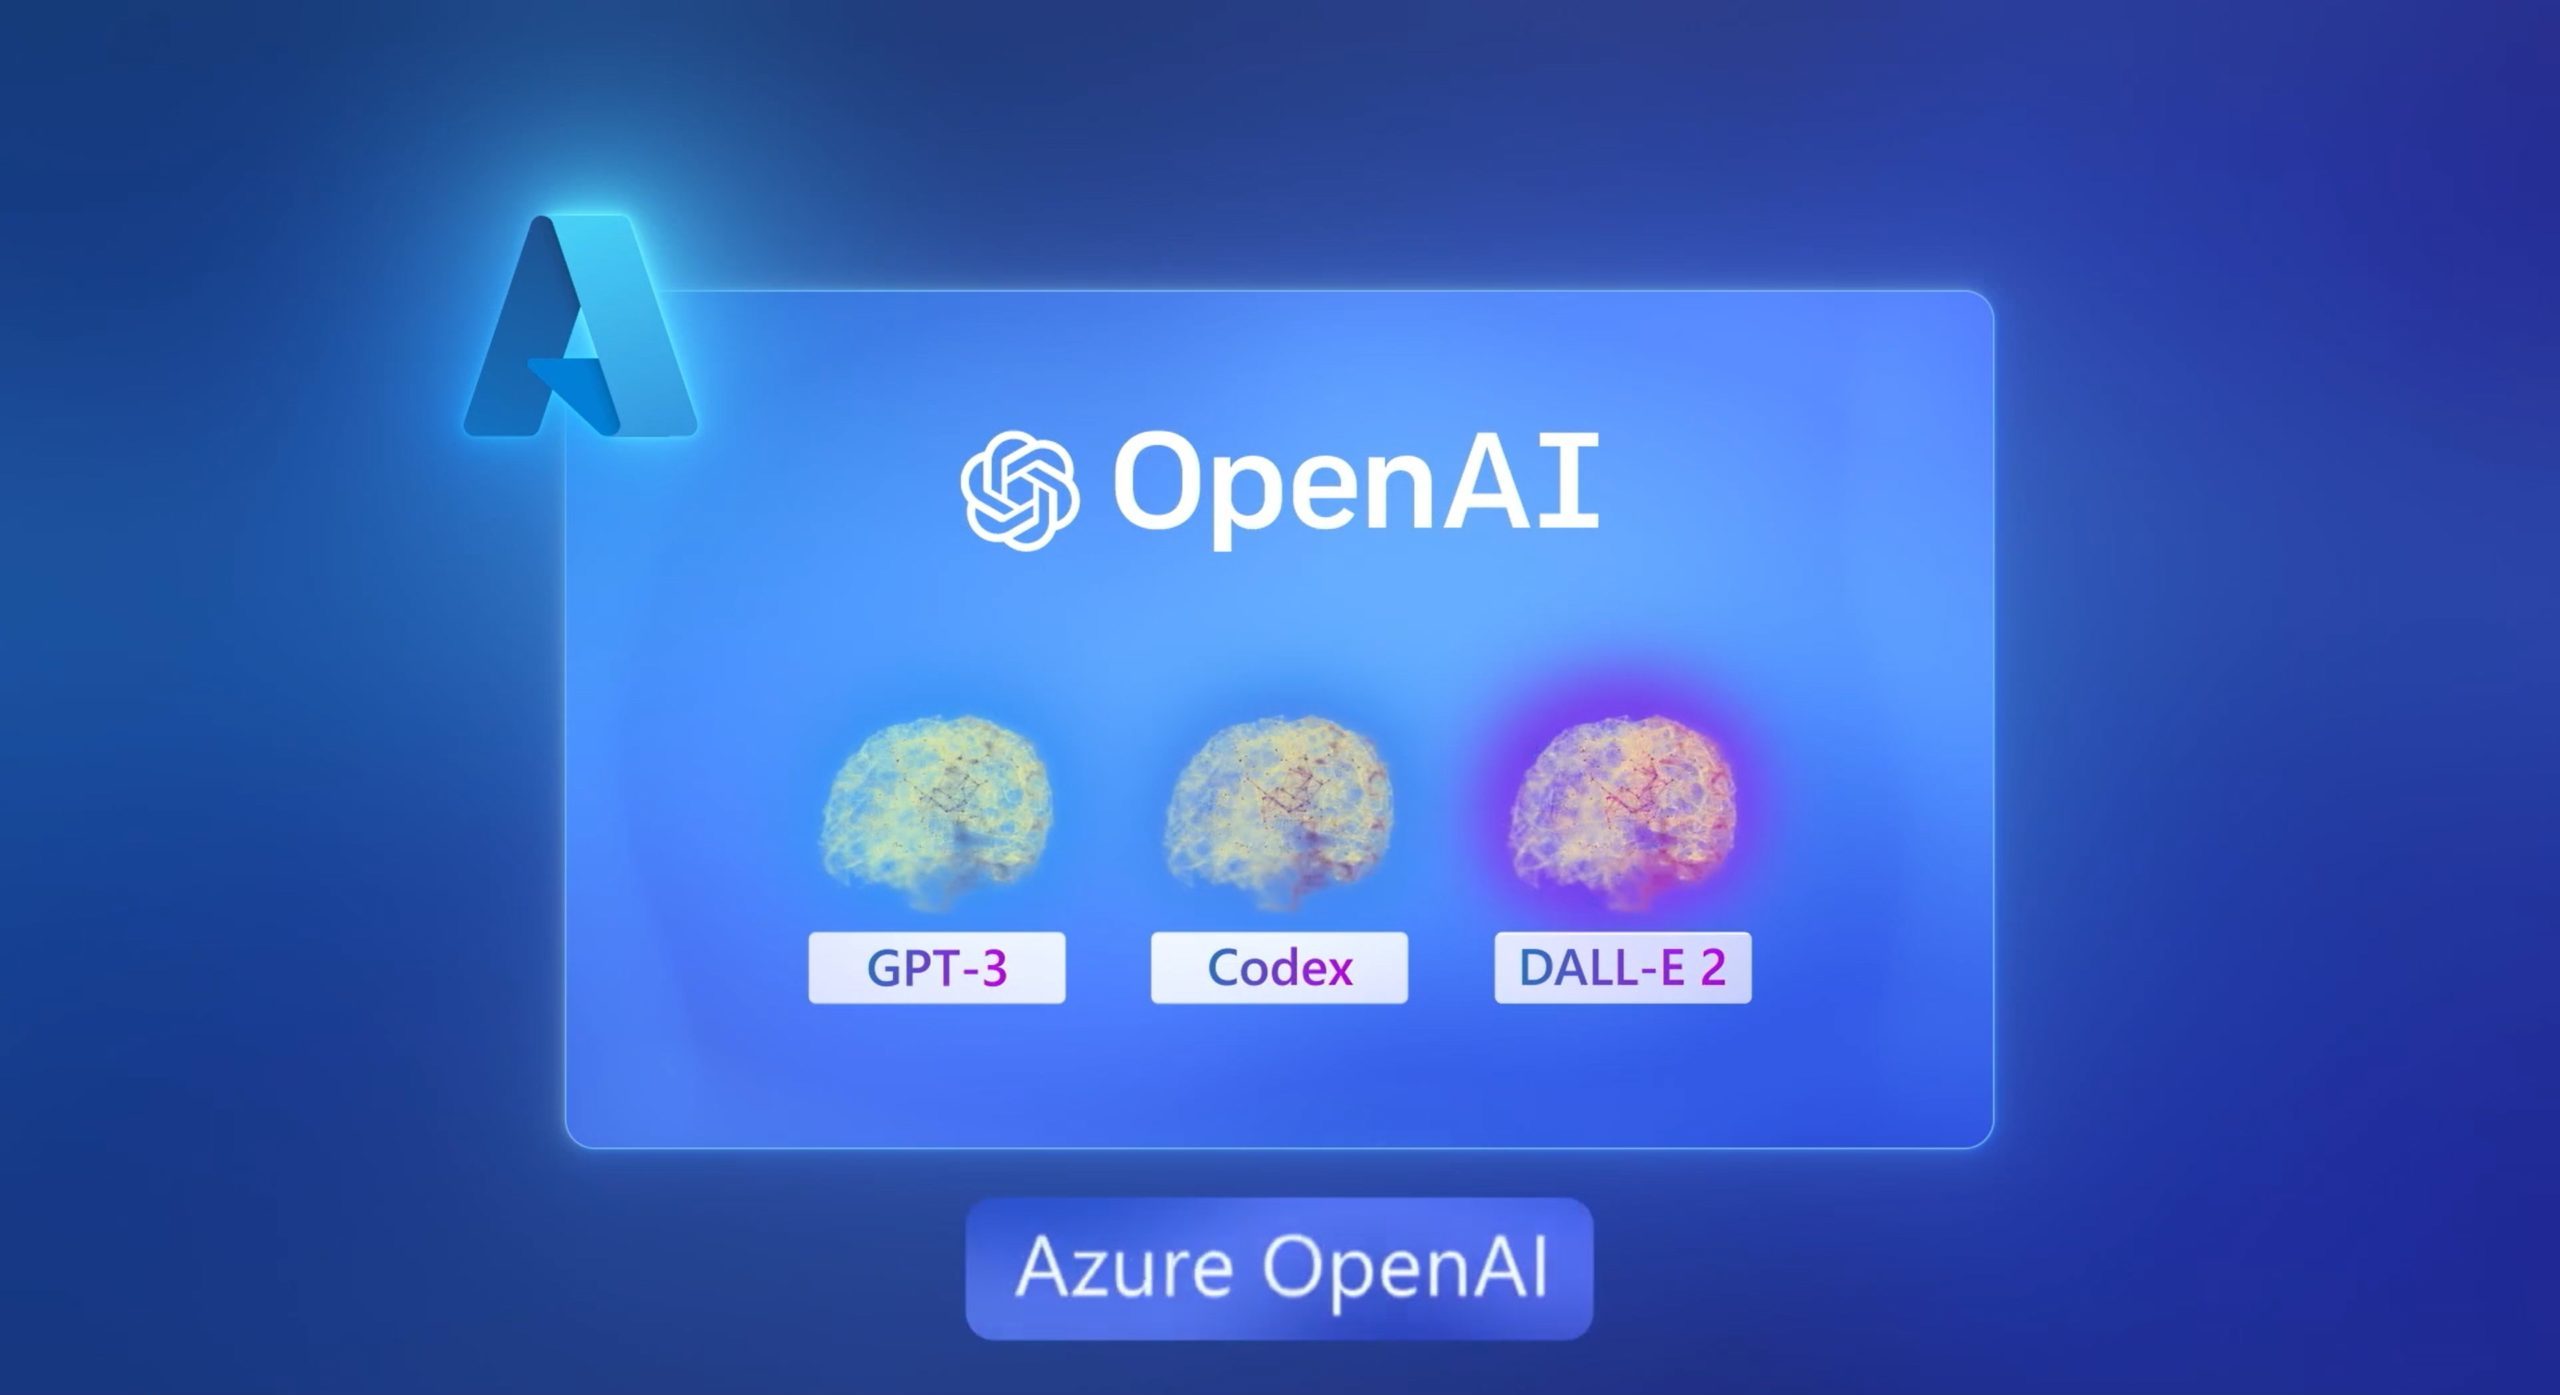 Microsoft announces Azure OpenAI, which will enable enterprise use of ChatGPT

